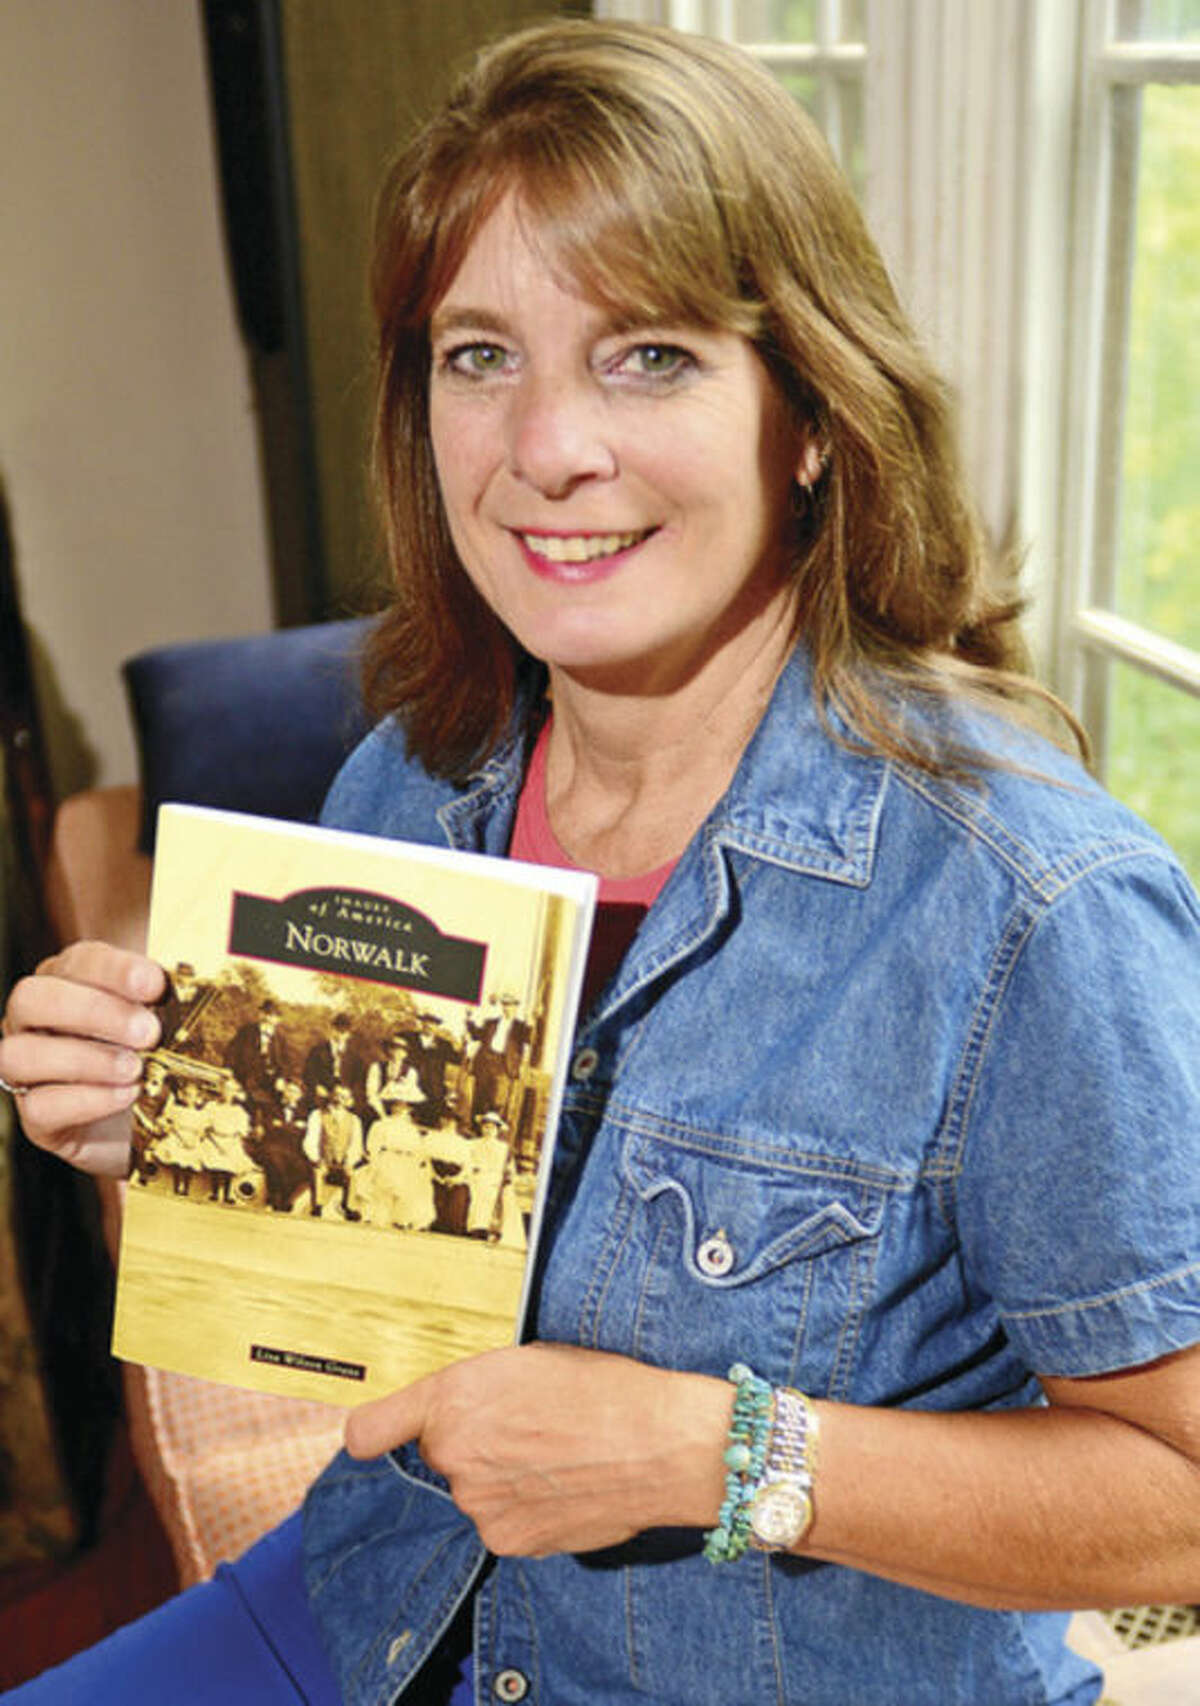 Hour photo / Erik Trautmann Lisa Wilson Grant has a newly published book "Norwalk", a pictoral history of the city.